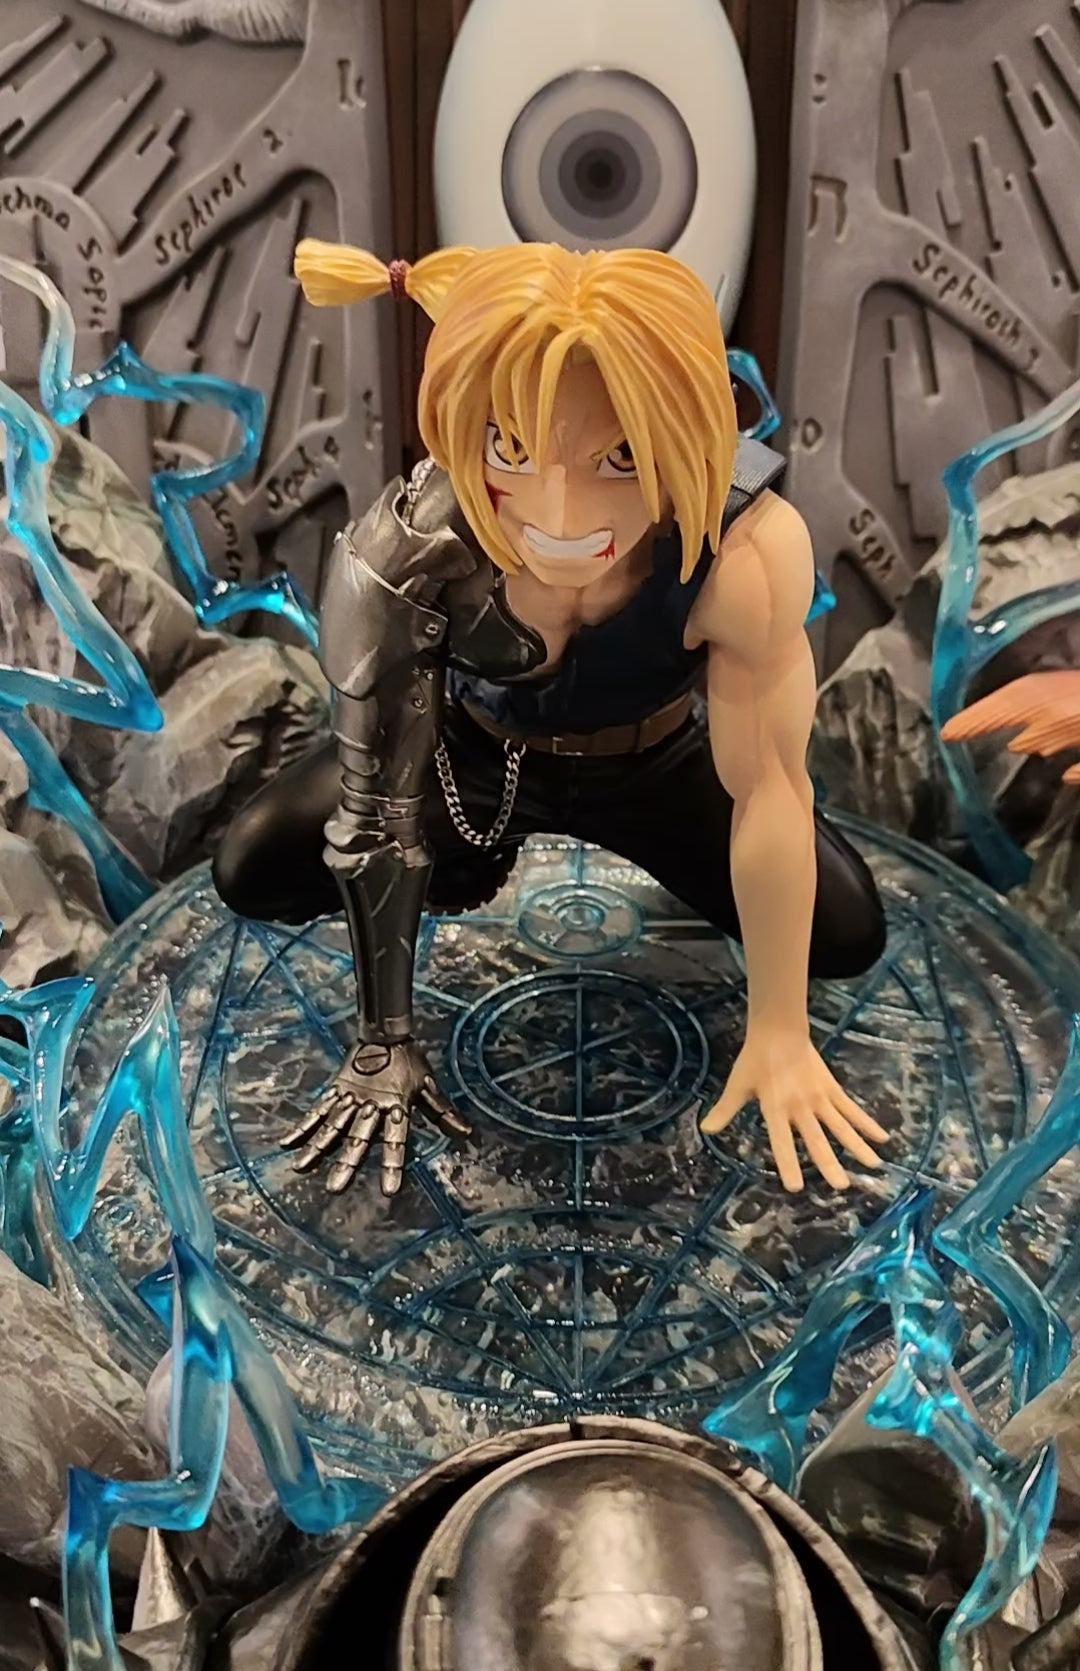 [IN STORE] Full Metal Alchemist - FMA - Limitless Studio - Edward and Alphonse Elric Resin Statue